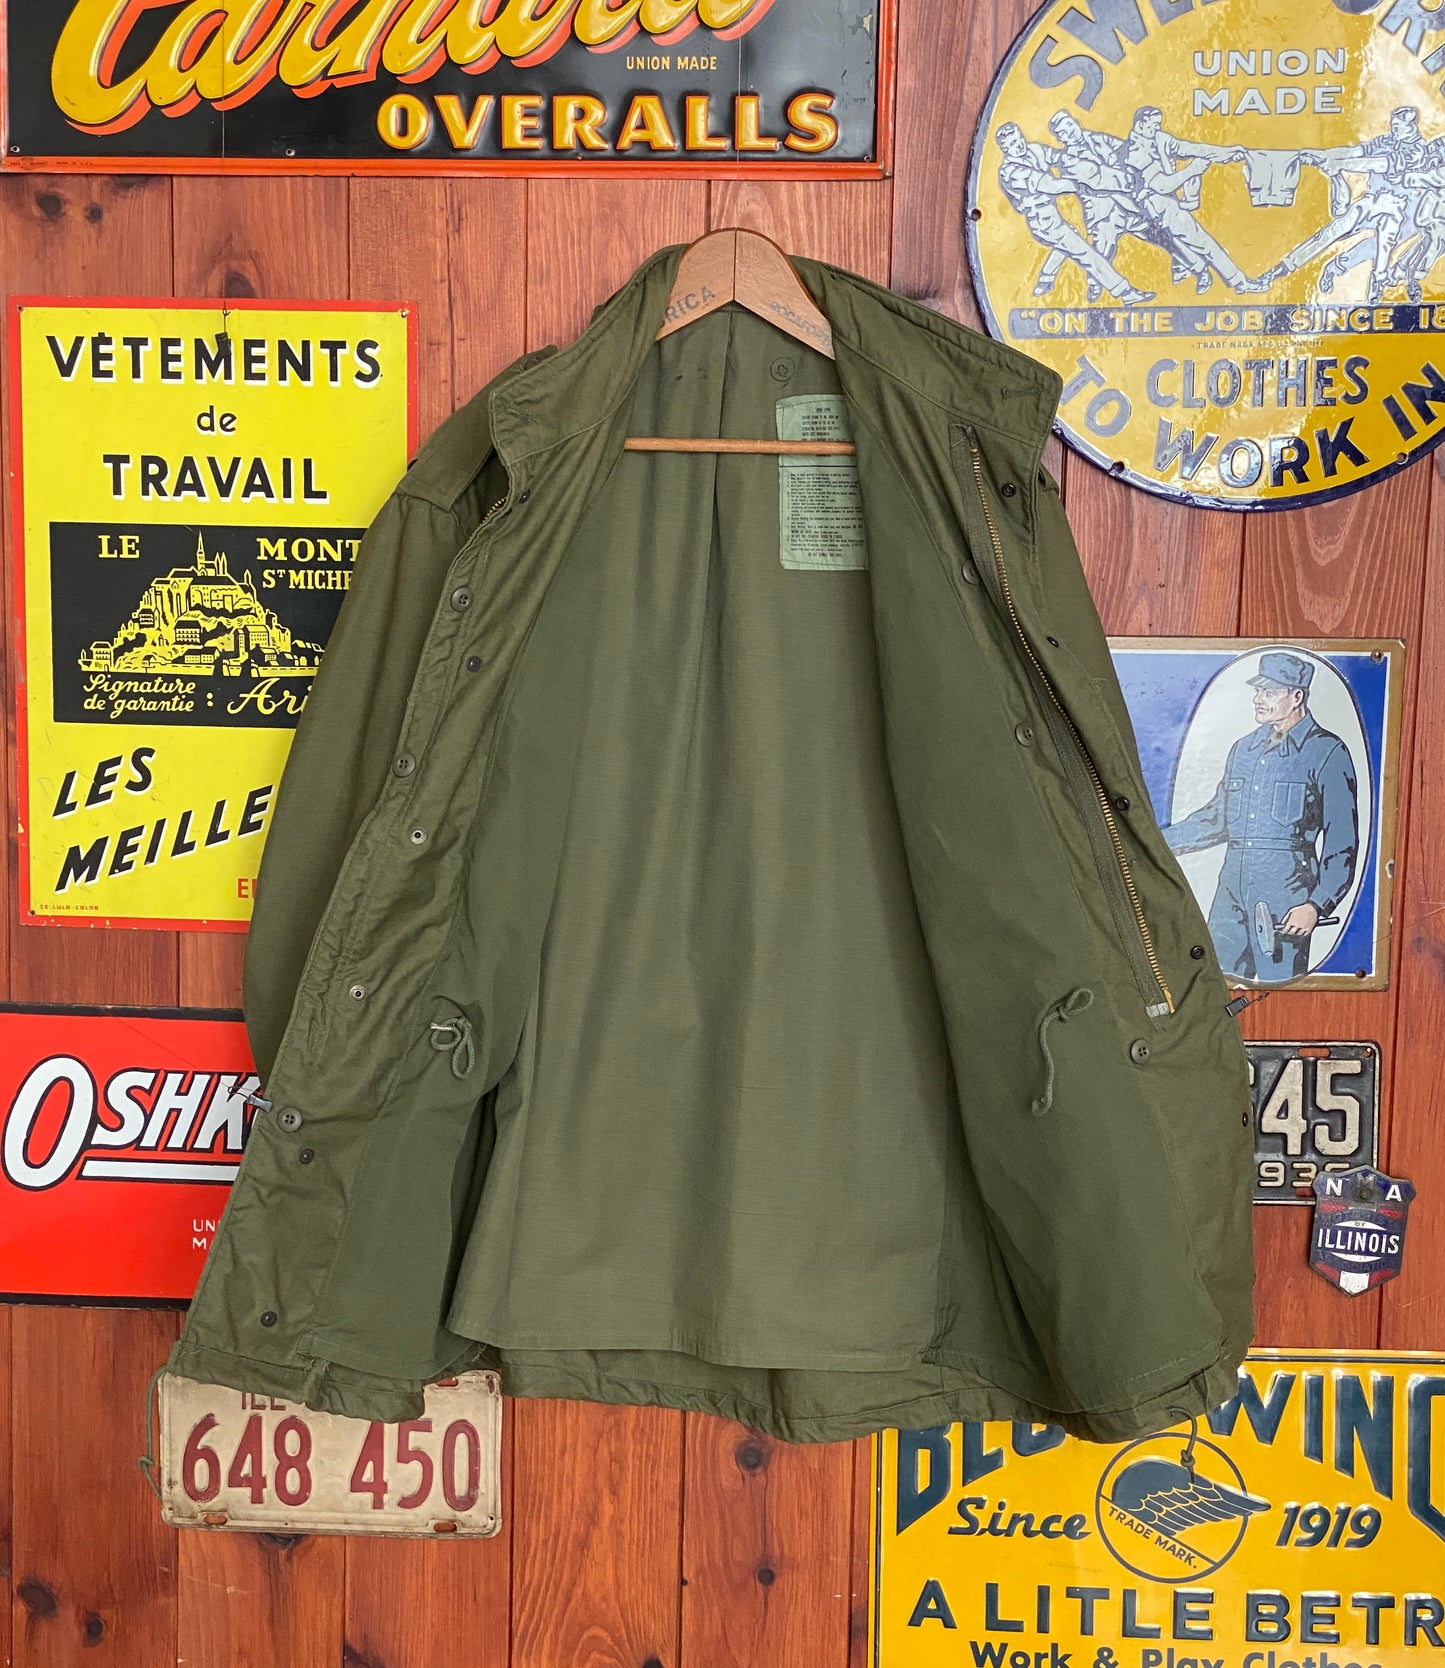 Vintage 1985 US Army M-65 Field Jacket: Authentic Military Gear with Timeless Style and History